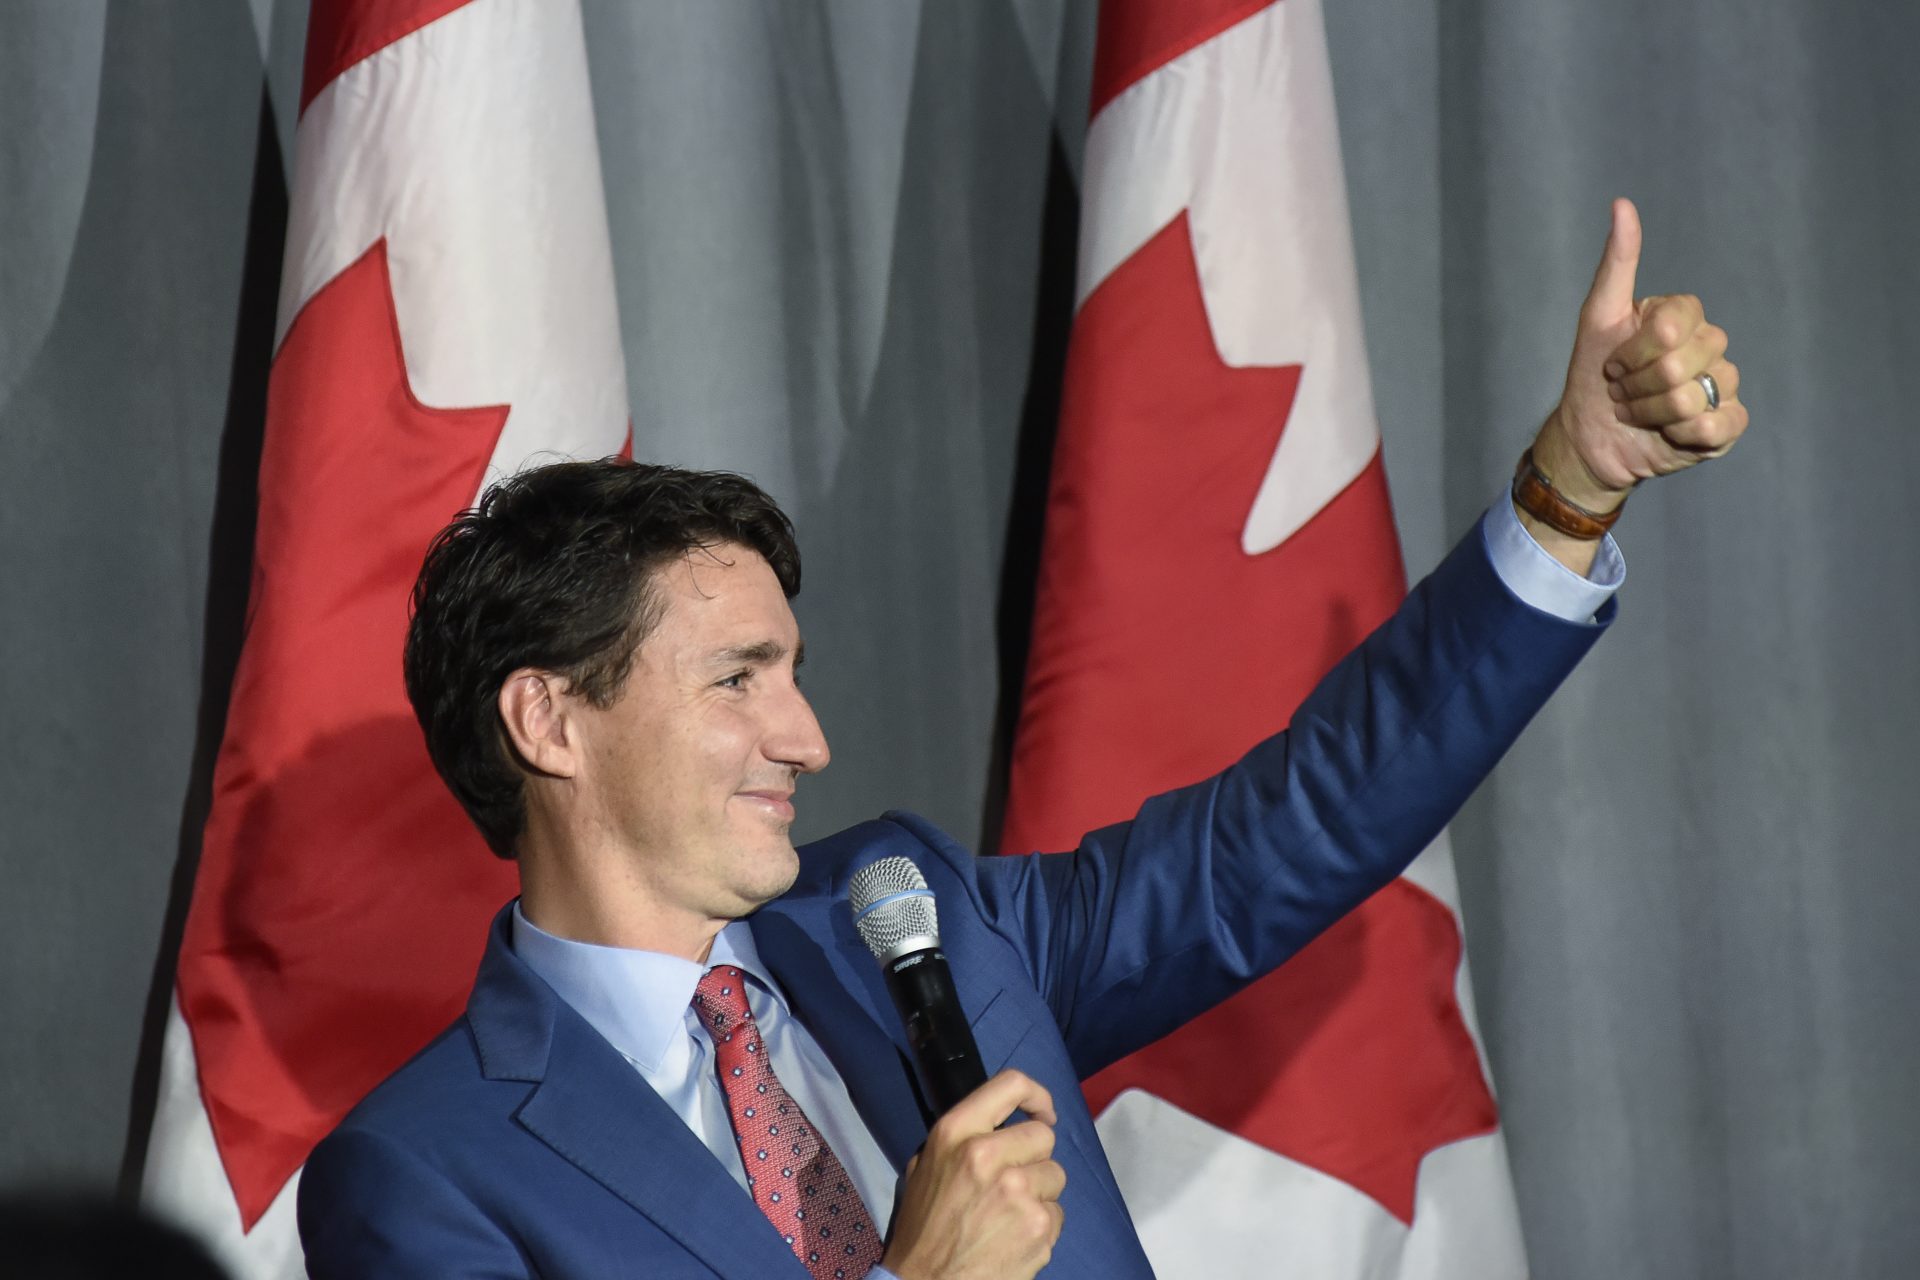 Half of Canadians want Trudeau to accept fewer immigrants